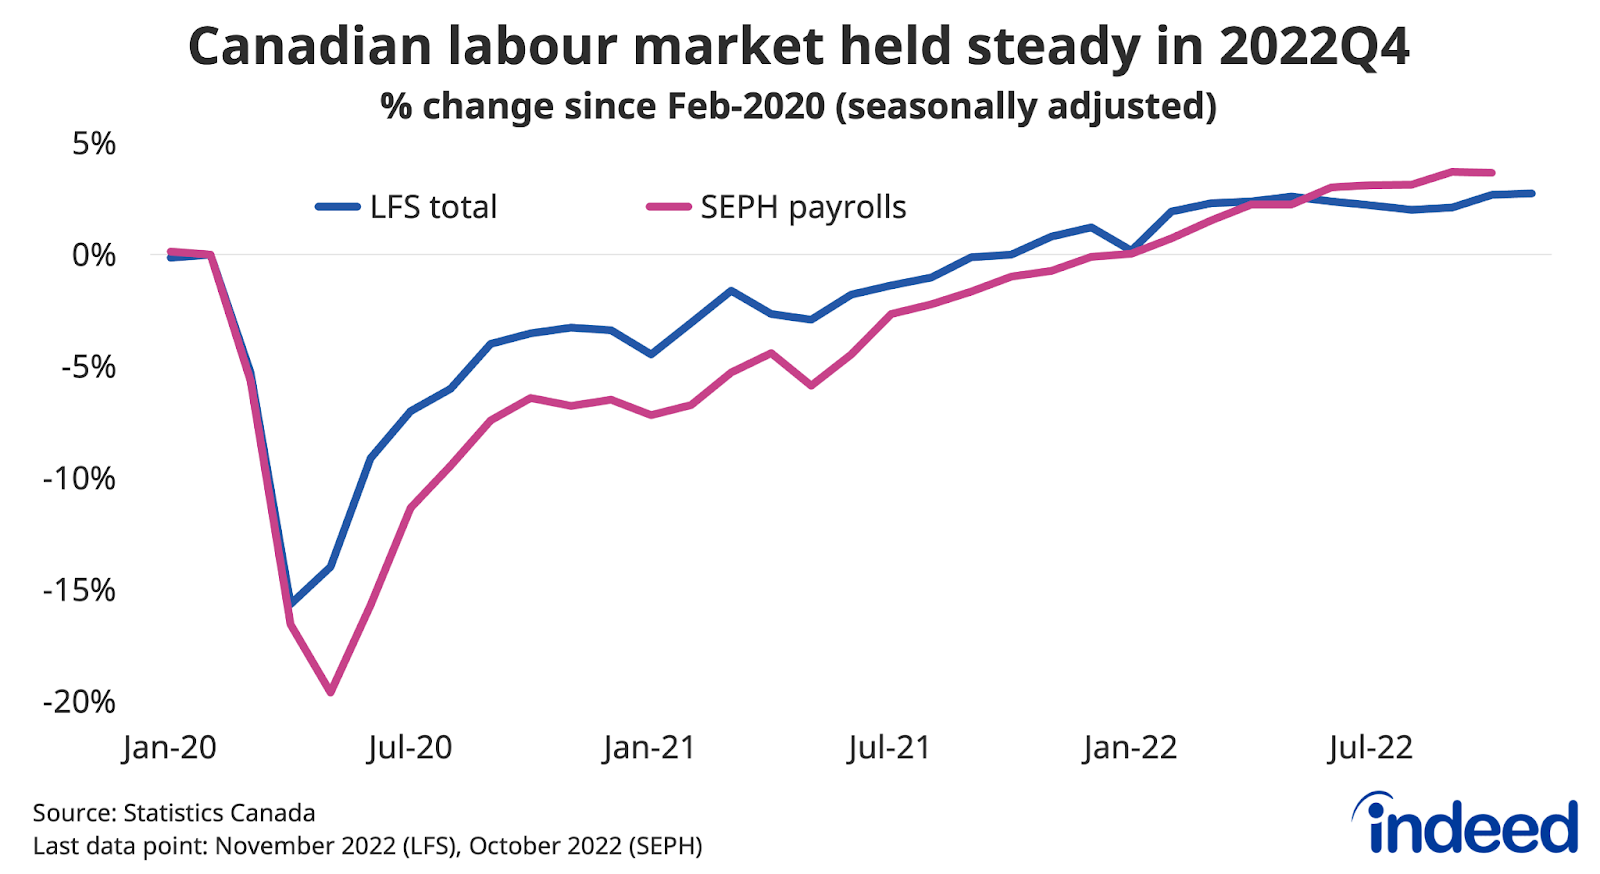 A line chart entitled “Canadian labour market held steady in 2022Q4” shows the percent change in employment since February 2020 according to the Labour Force Survey (LFS) through November 2022, and the Survey of Employment, Payrolls, and Hours (SEPH), through October 2022.